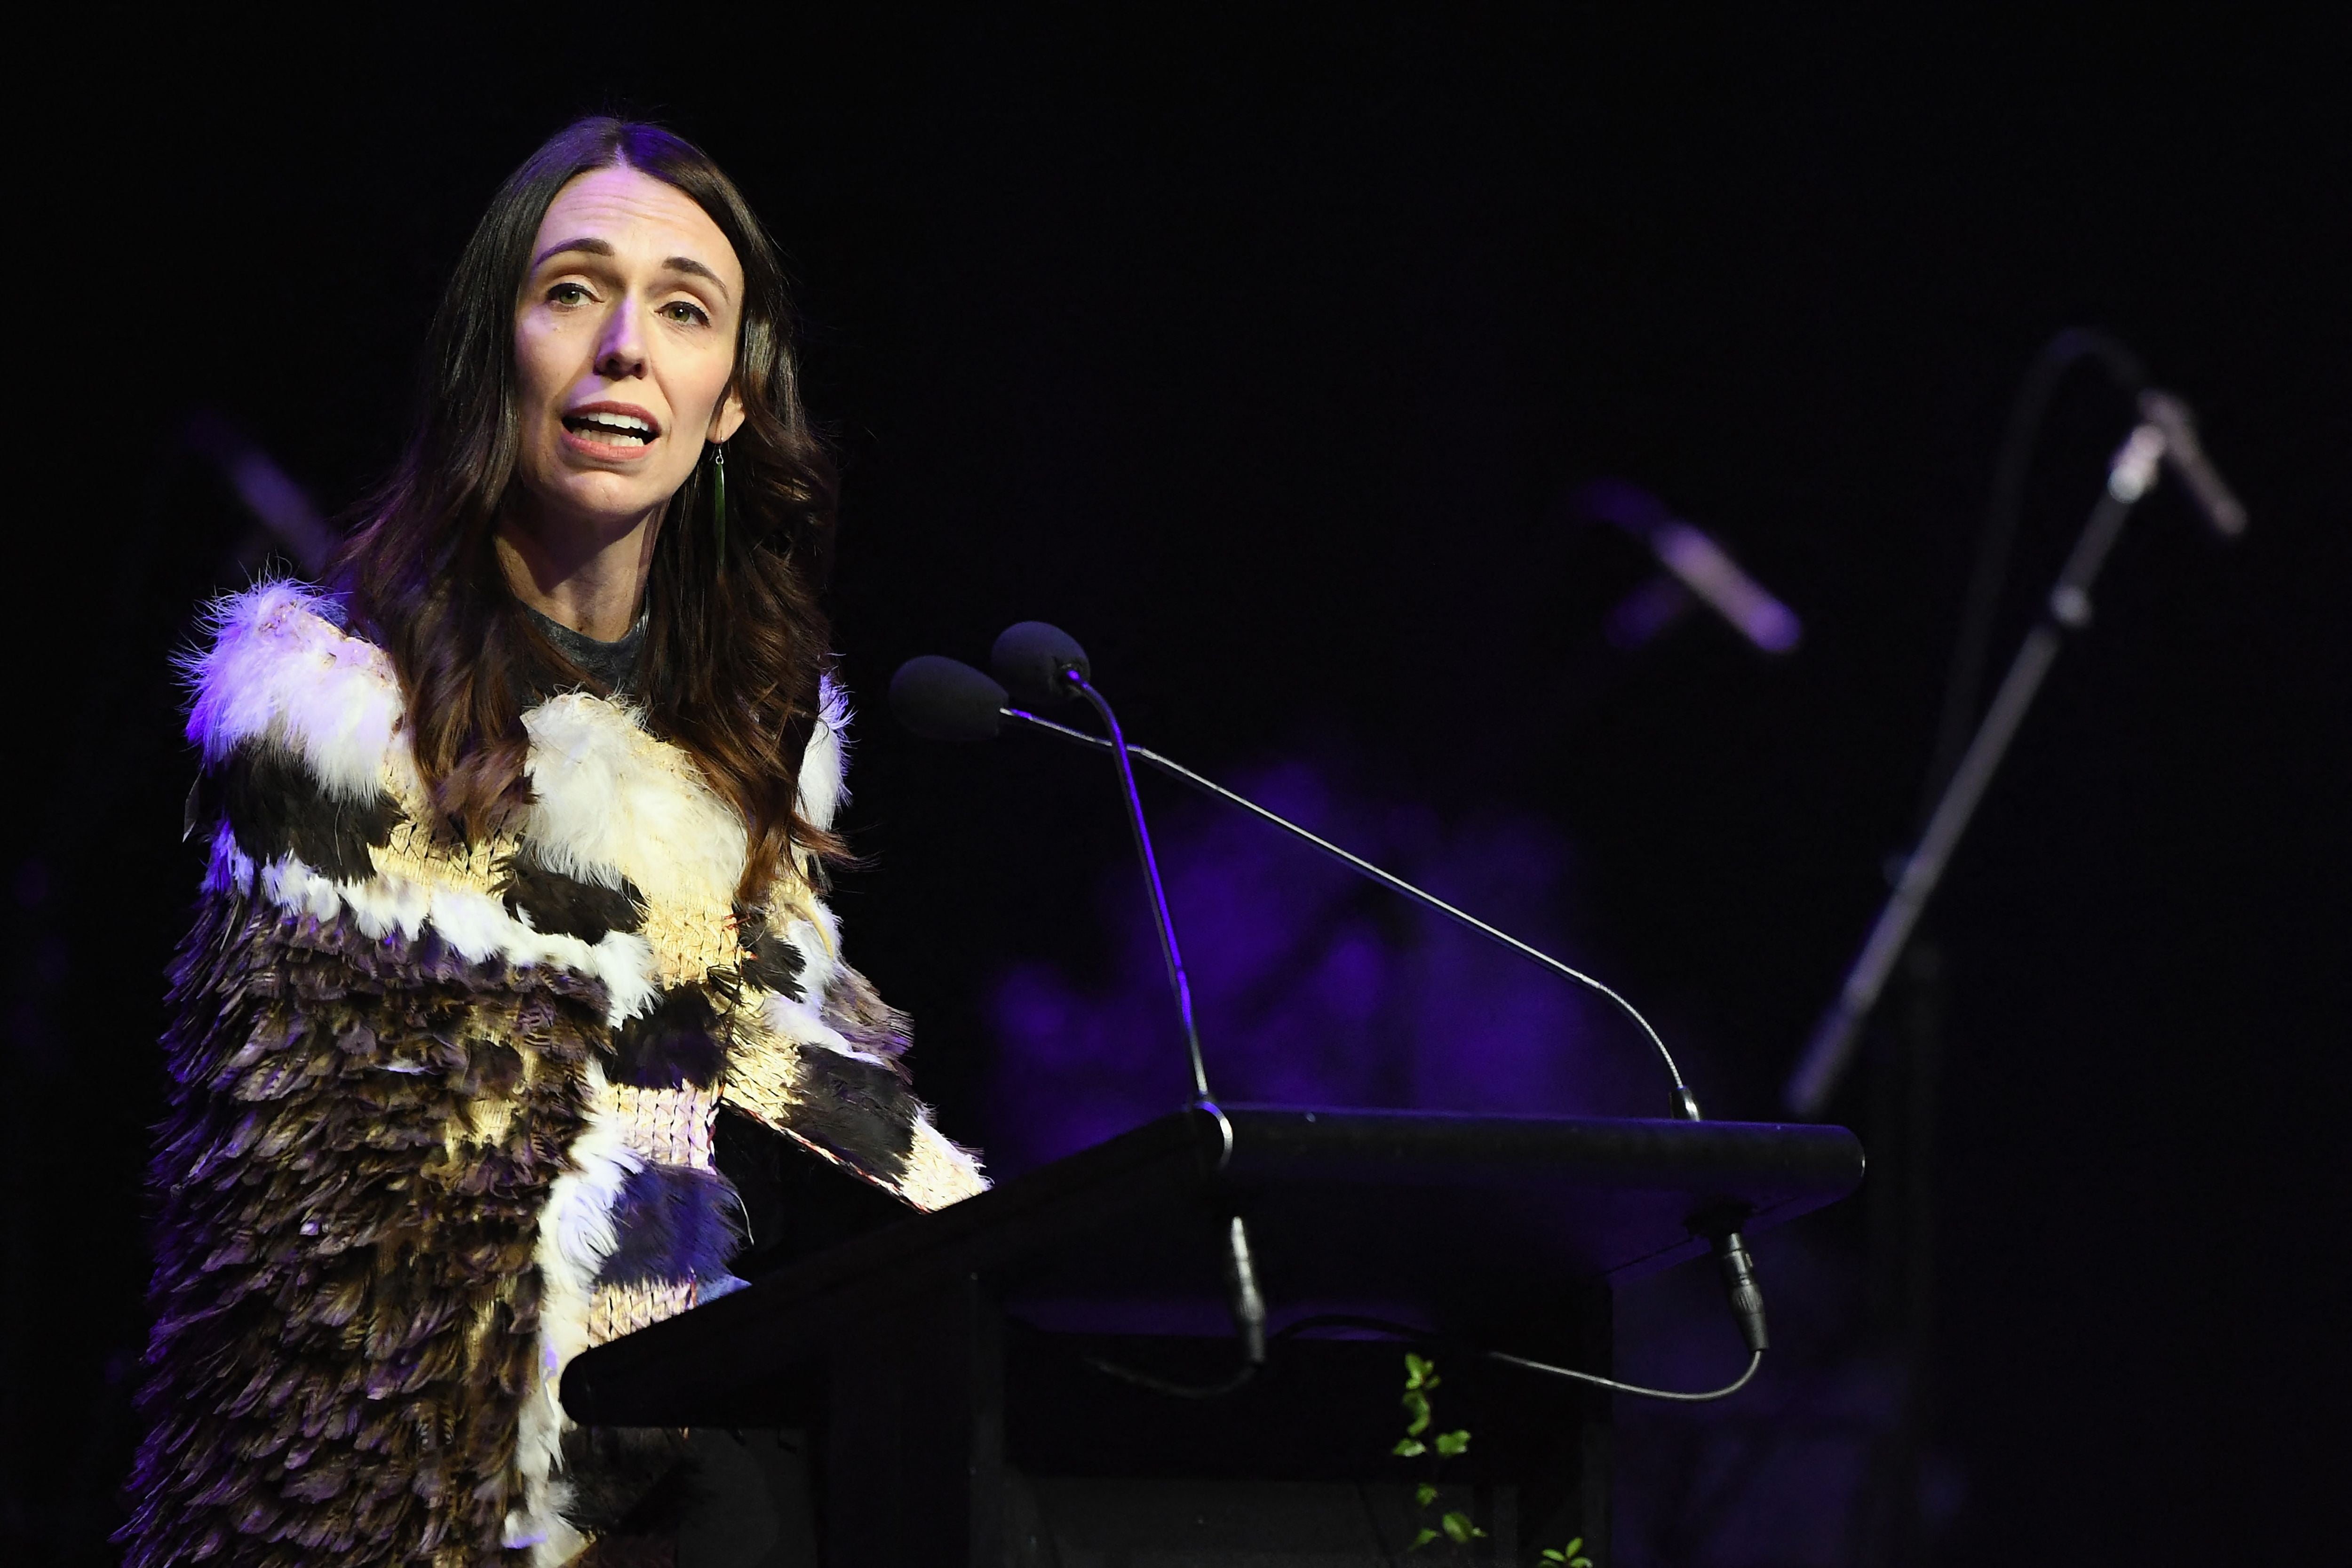 File image: New Zealand prime minister Jacinda Ardern speaks during a national remembrance service in Christchurch on 13 March, 2021 to mark two years of the Christchurch mosque attacks